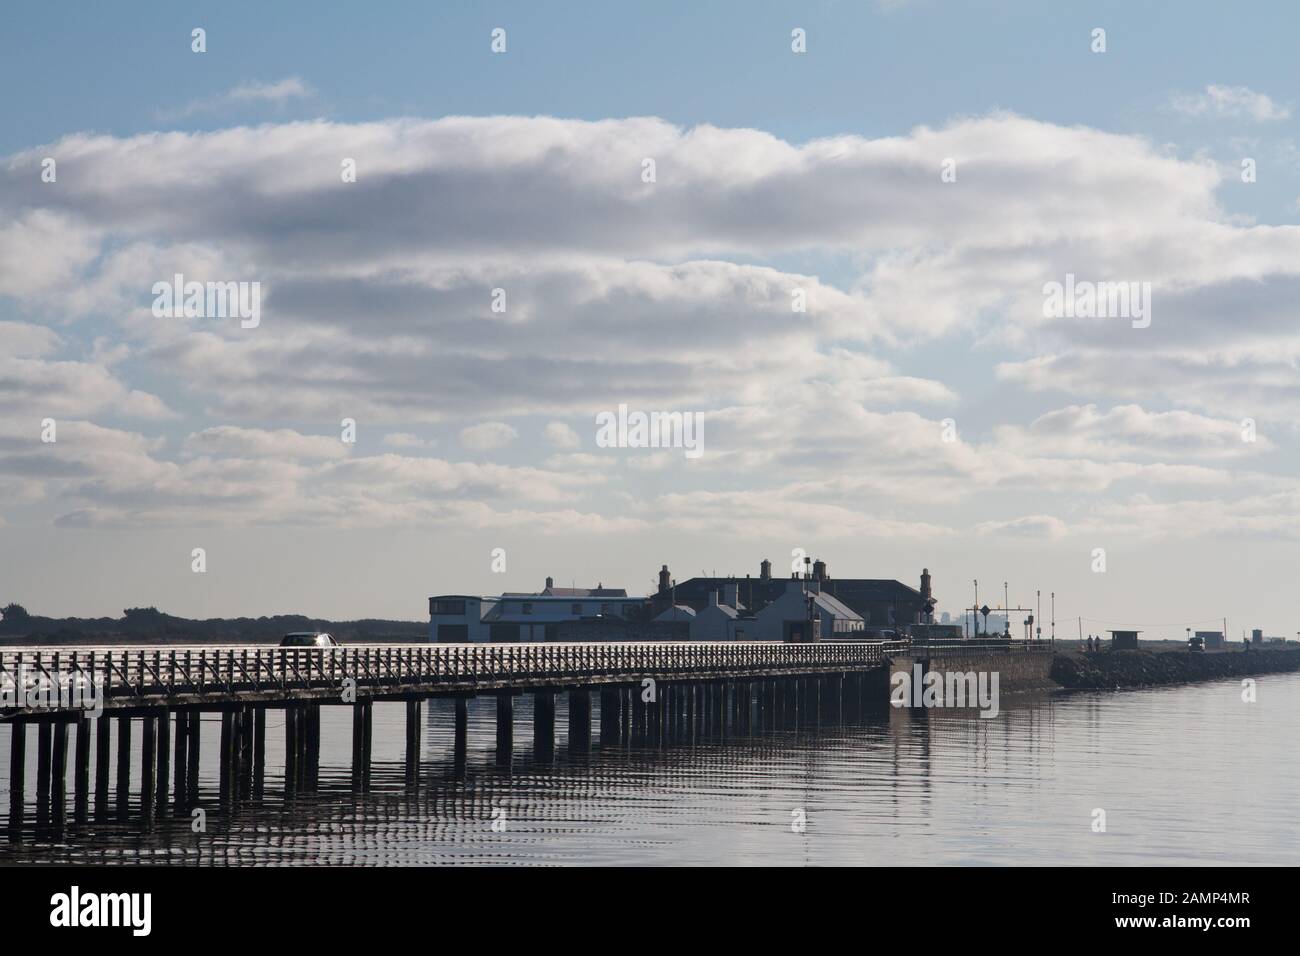 Bull Island High Resolution Stock Photography and Images - Alamy